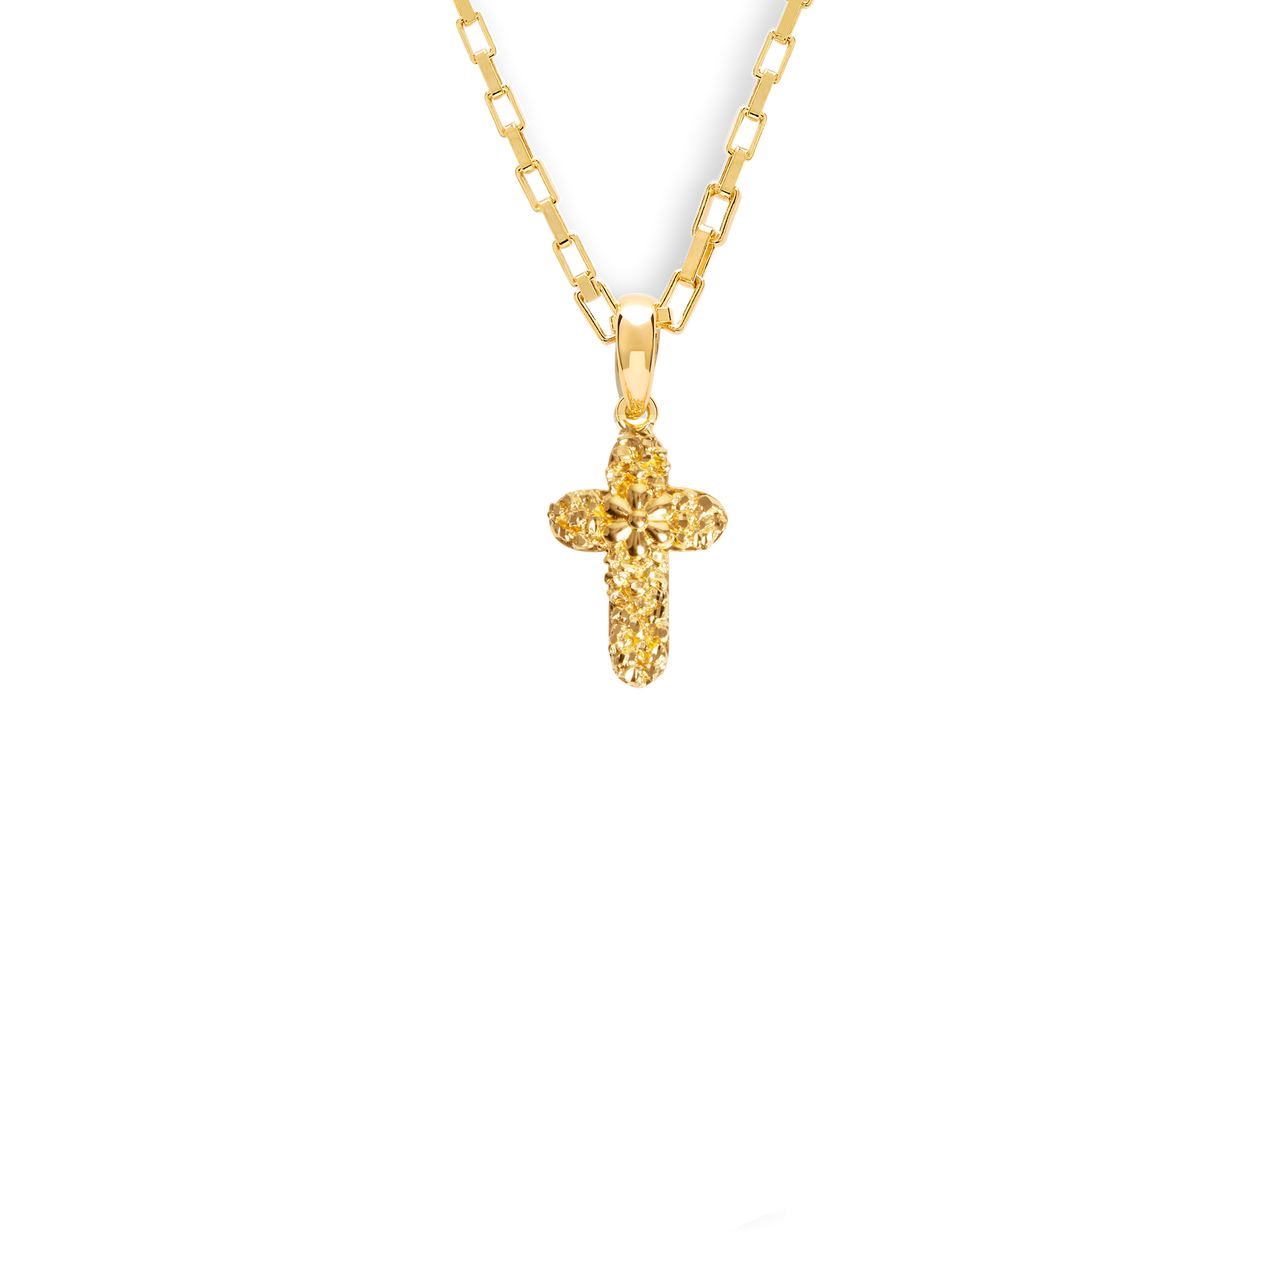 VC064 SMALL FLOWER CROSS PENDANT NECKLACE